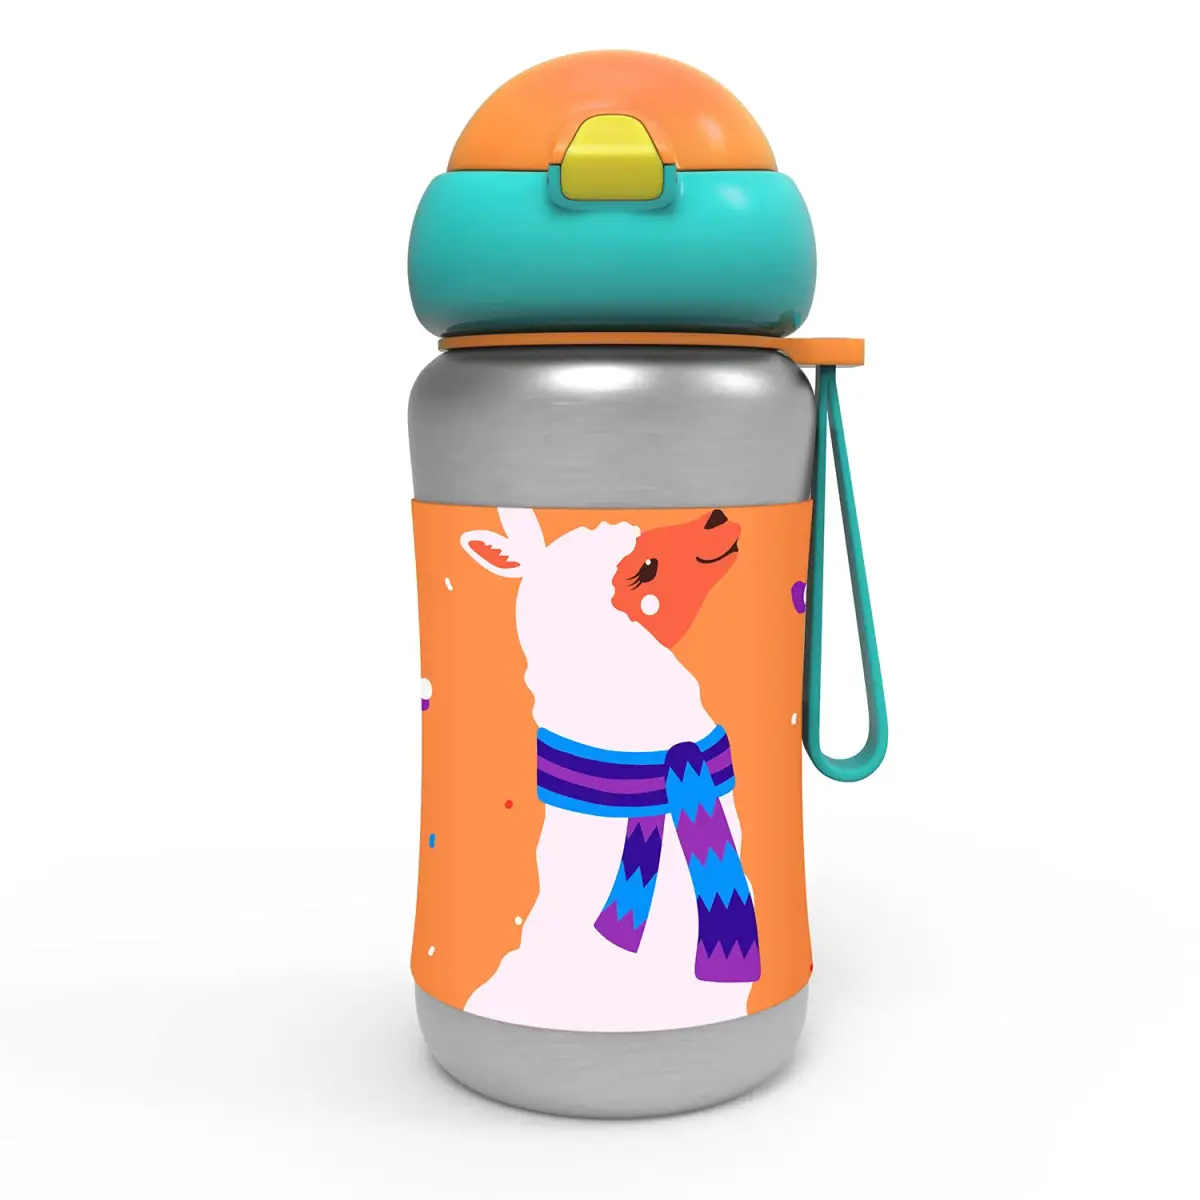 Rabitat Steel Play Sports Stainless Steel Sipper Bottle No Prob Llama 350 ml For Kids of Age 3Y+, Multicolour